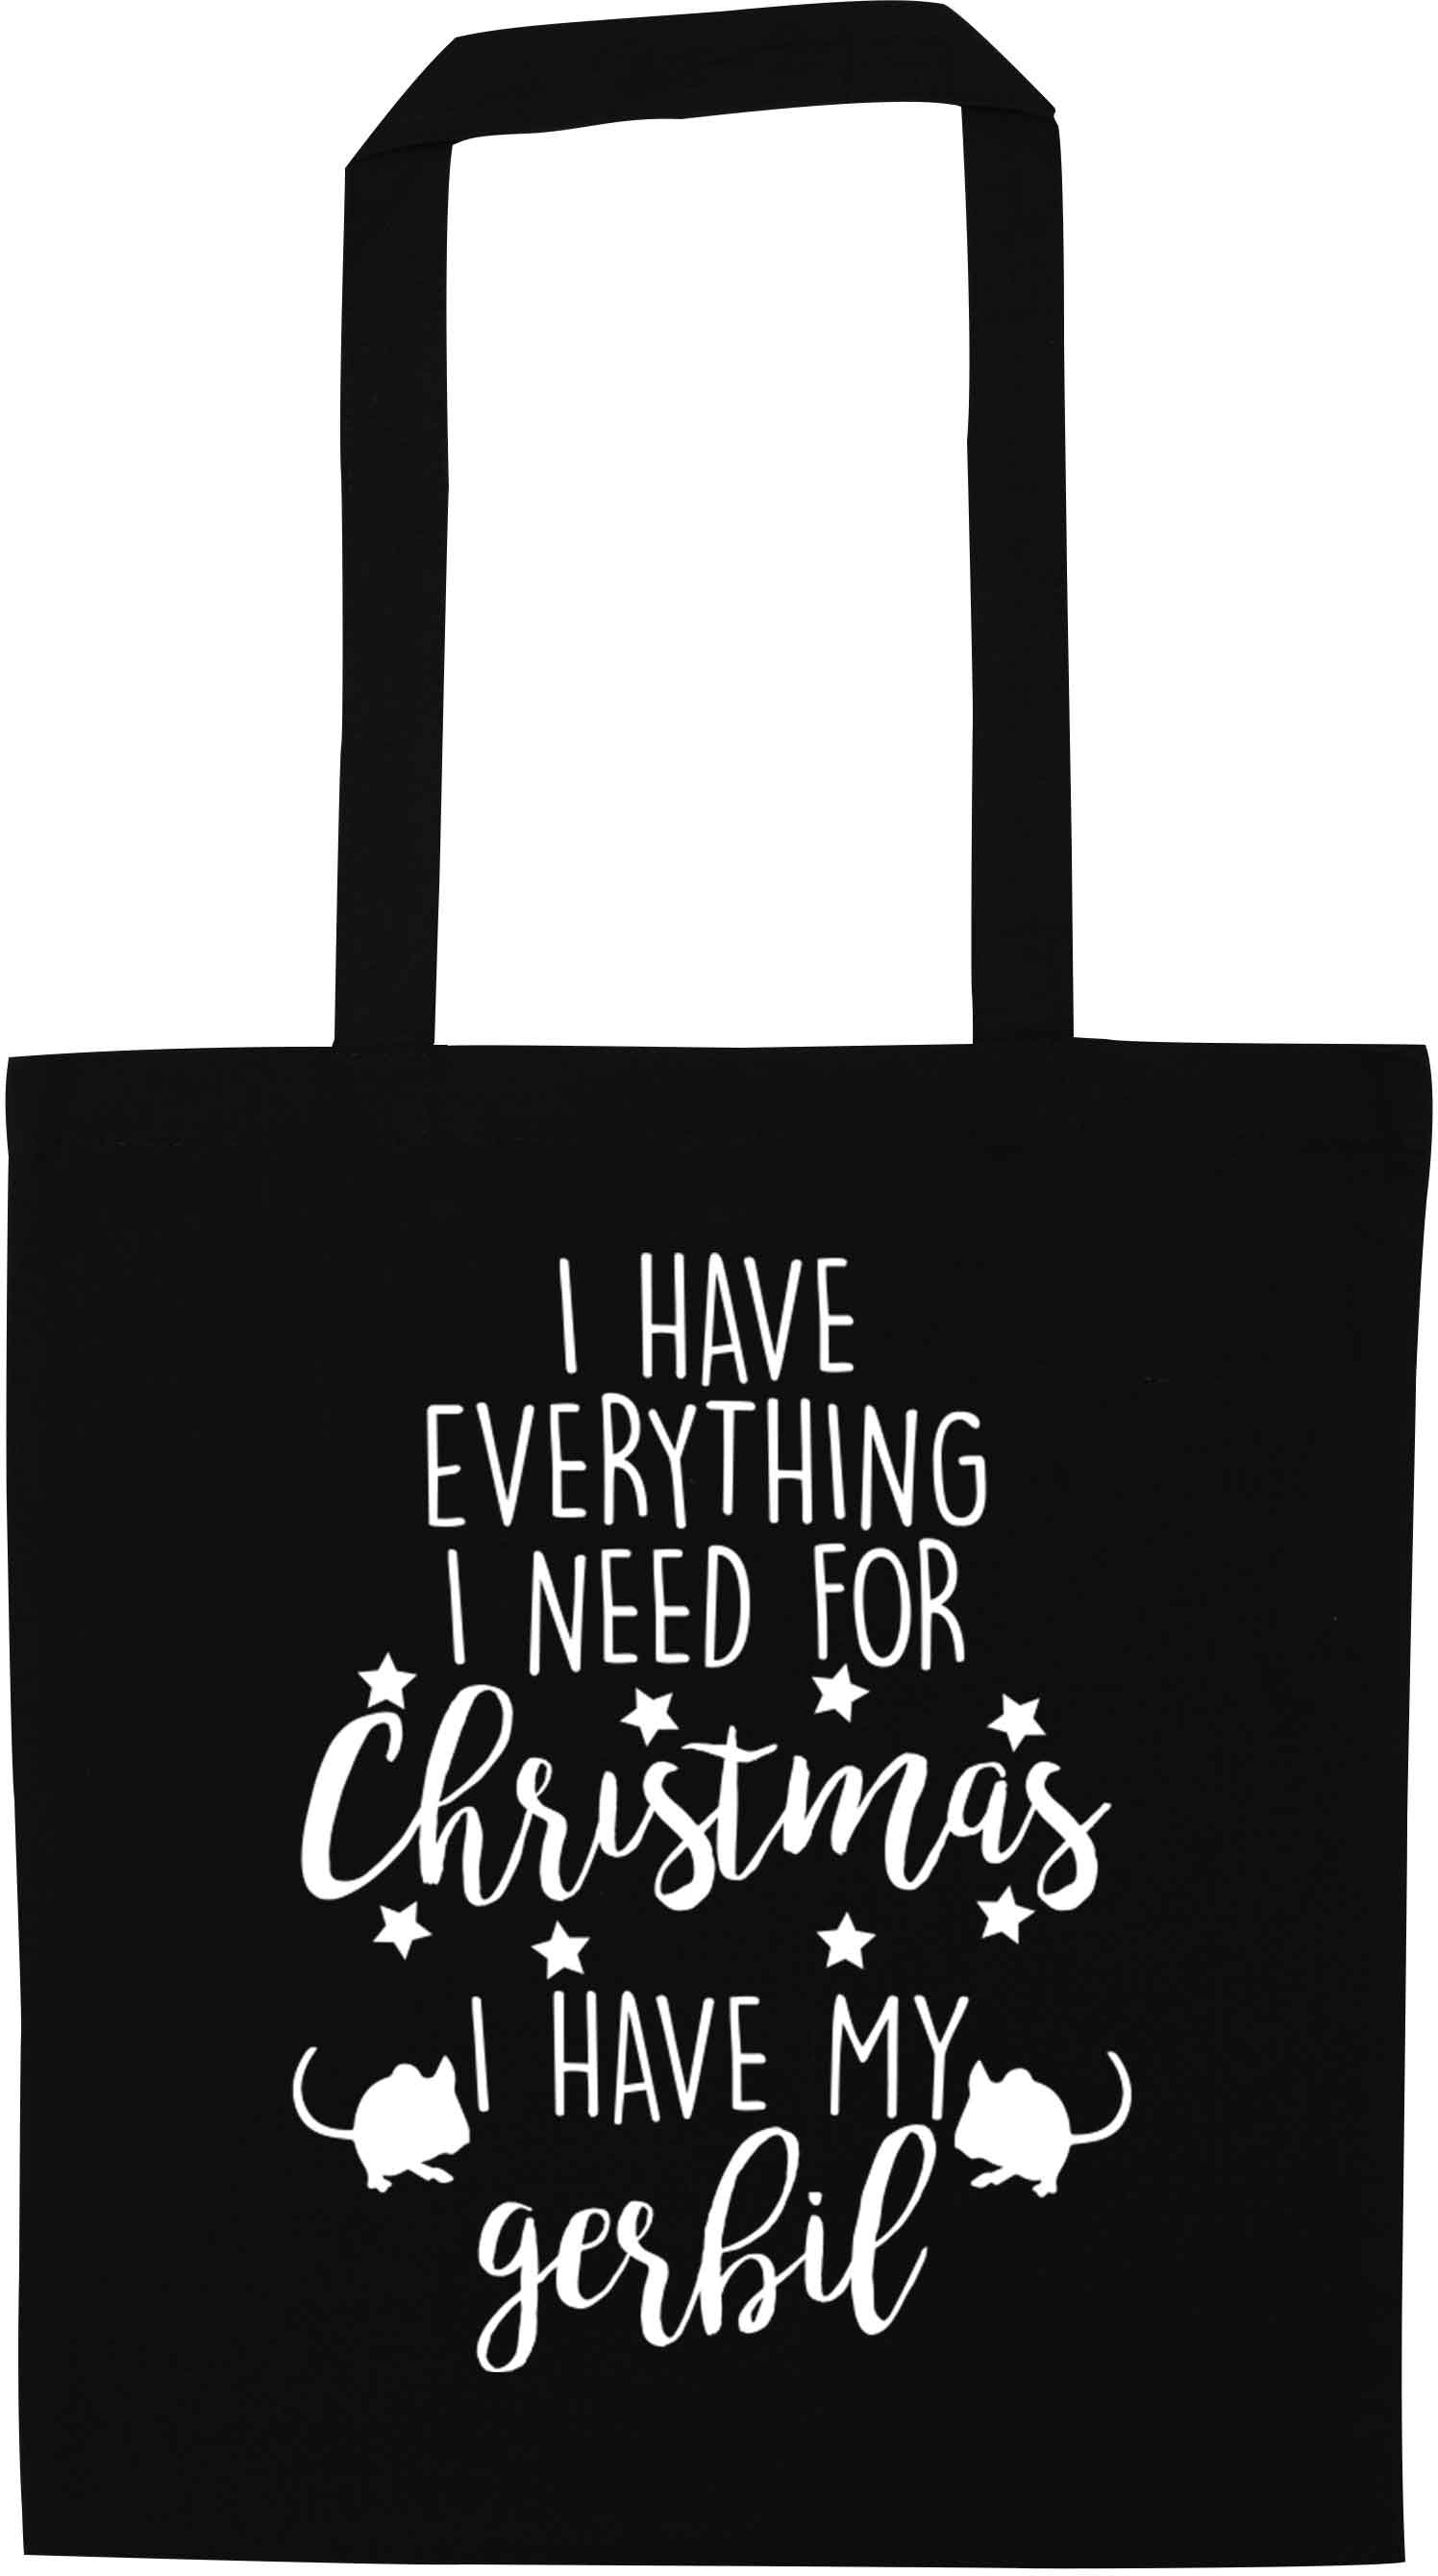 I have everything I need for Christmas I have my gerbil black tote bag